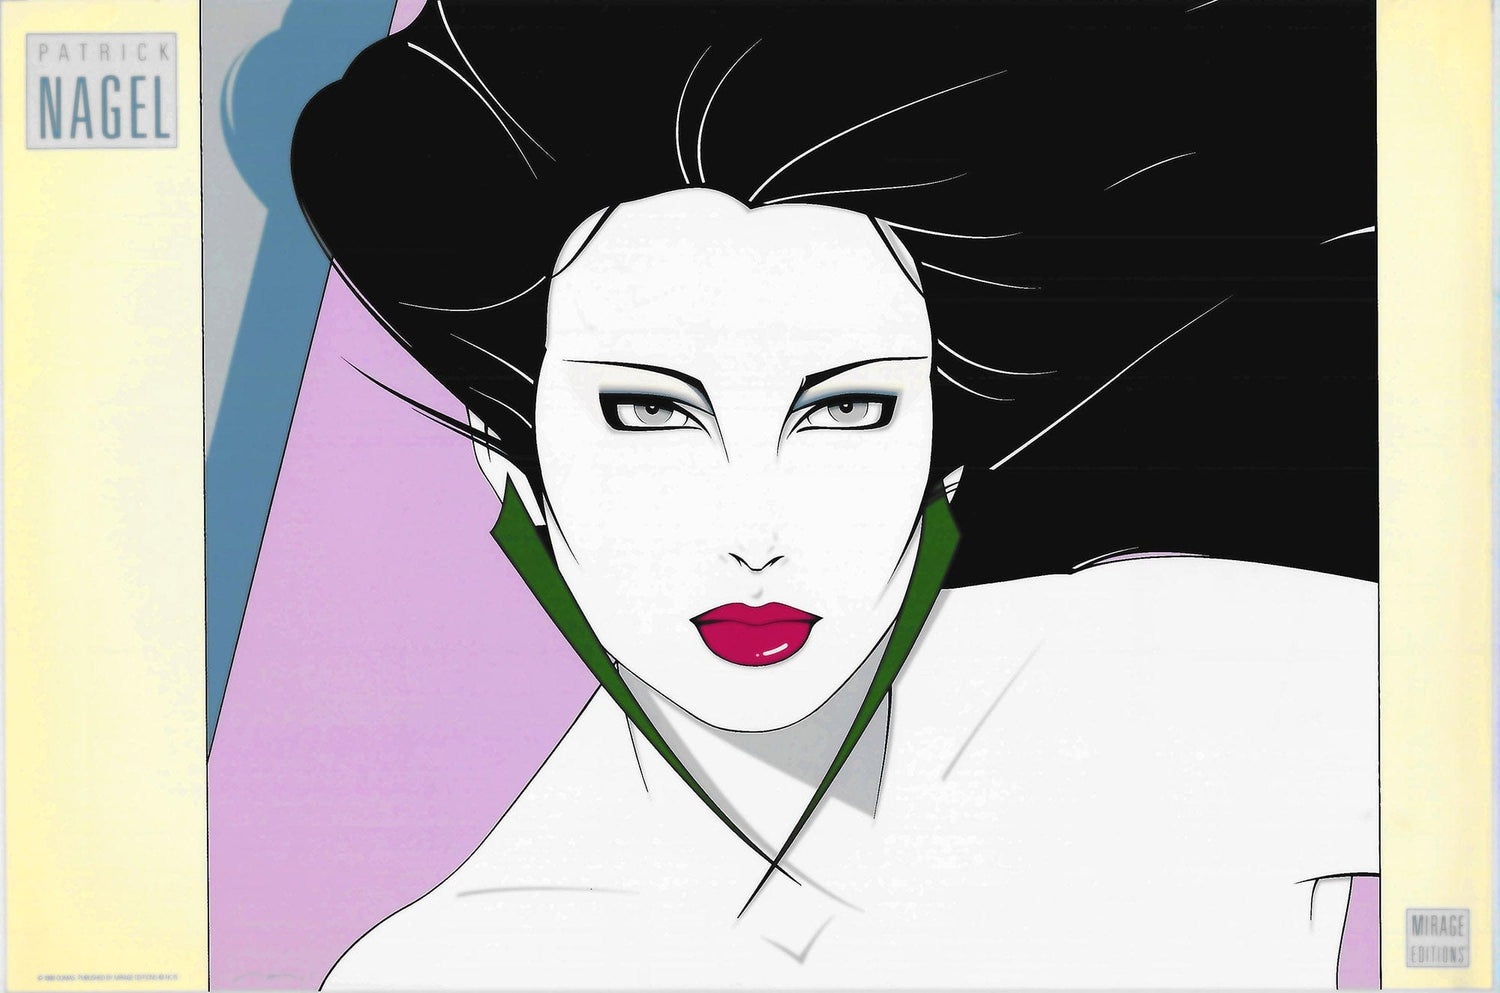 Patrick Nagel: Woman With Green Earrings